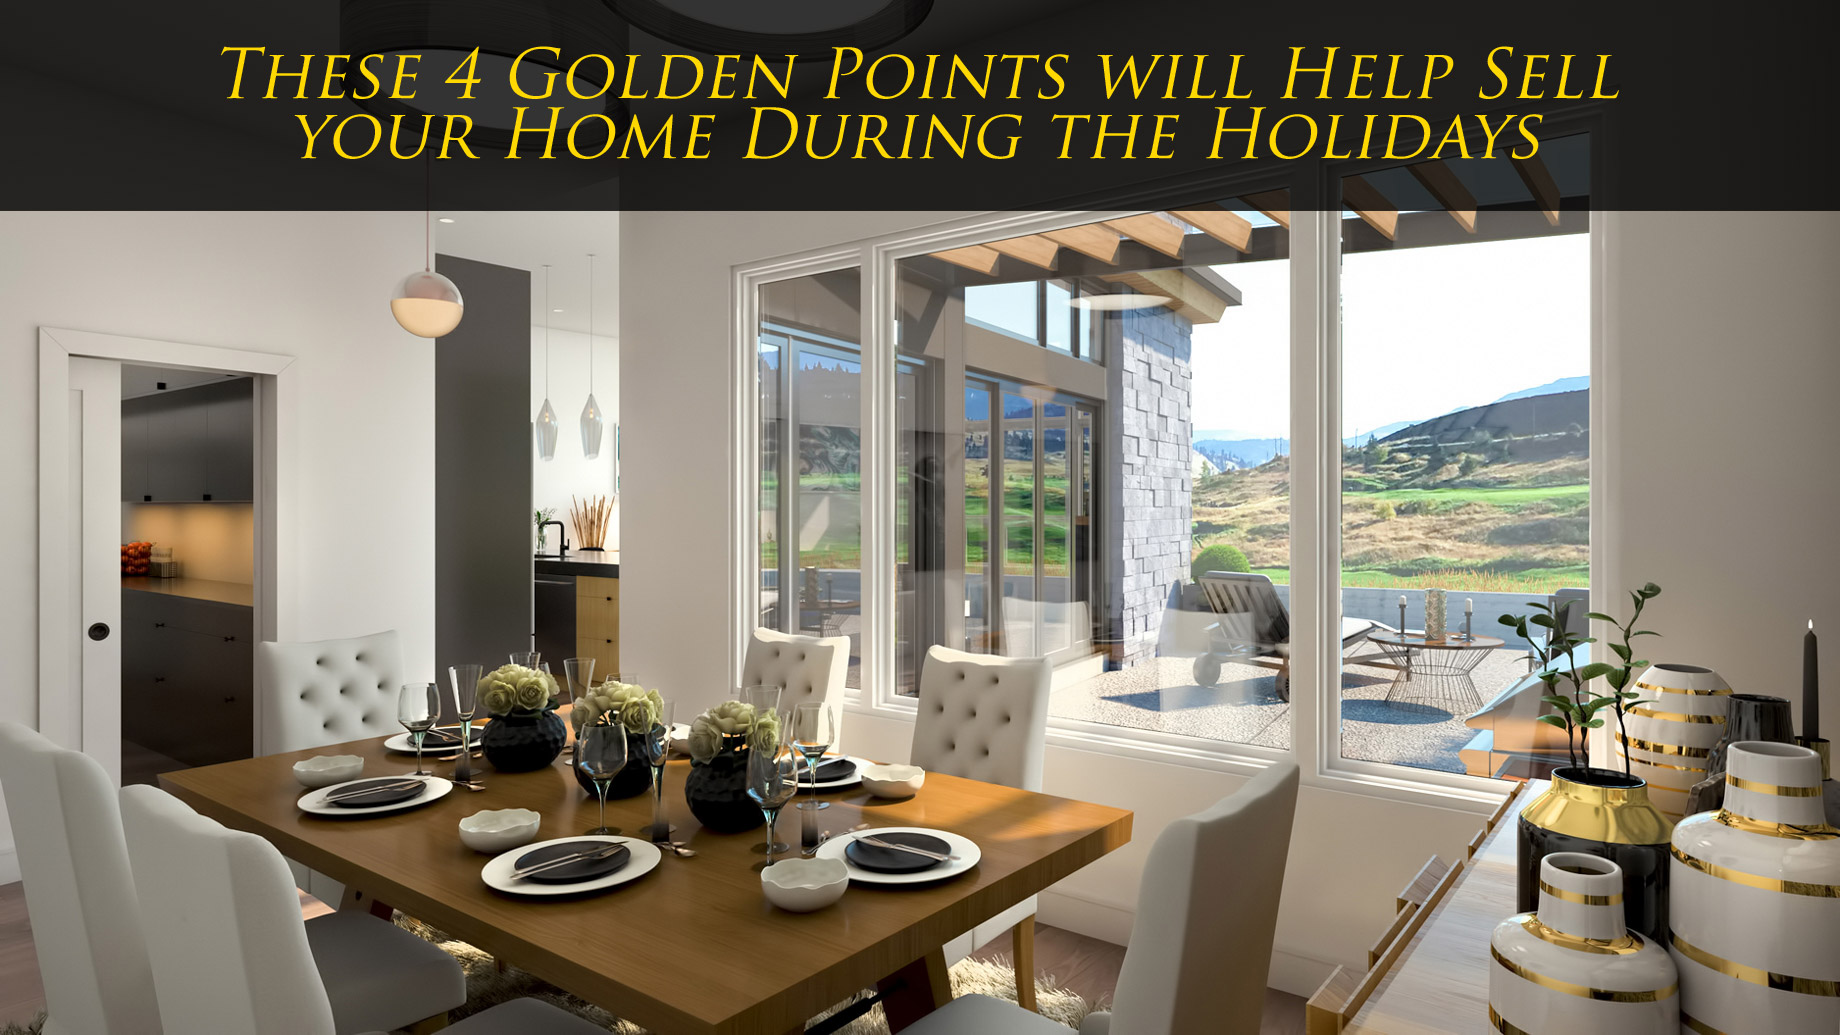 Real Estate Tips - These 4 Golden Points will Help Sell your Home During the Holidays